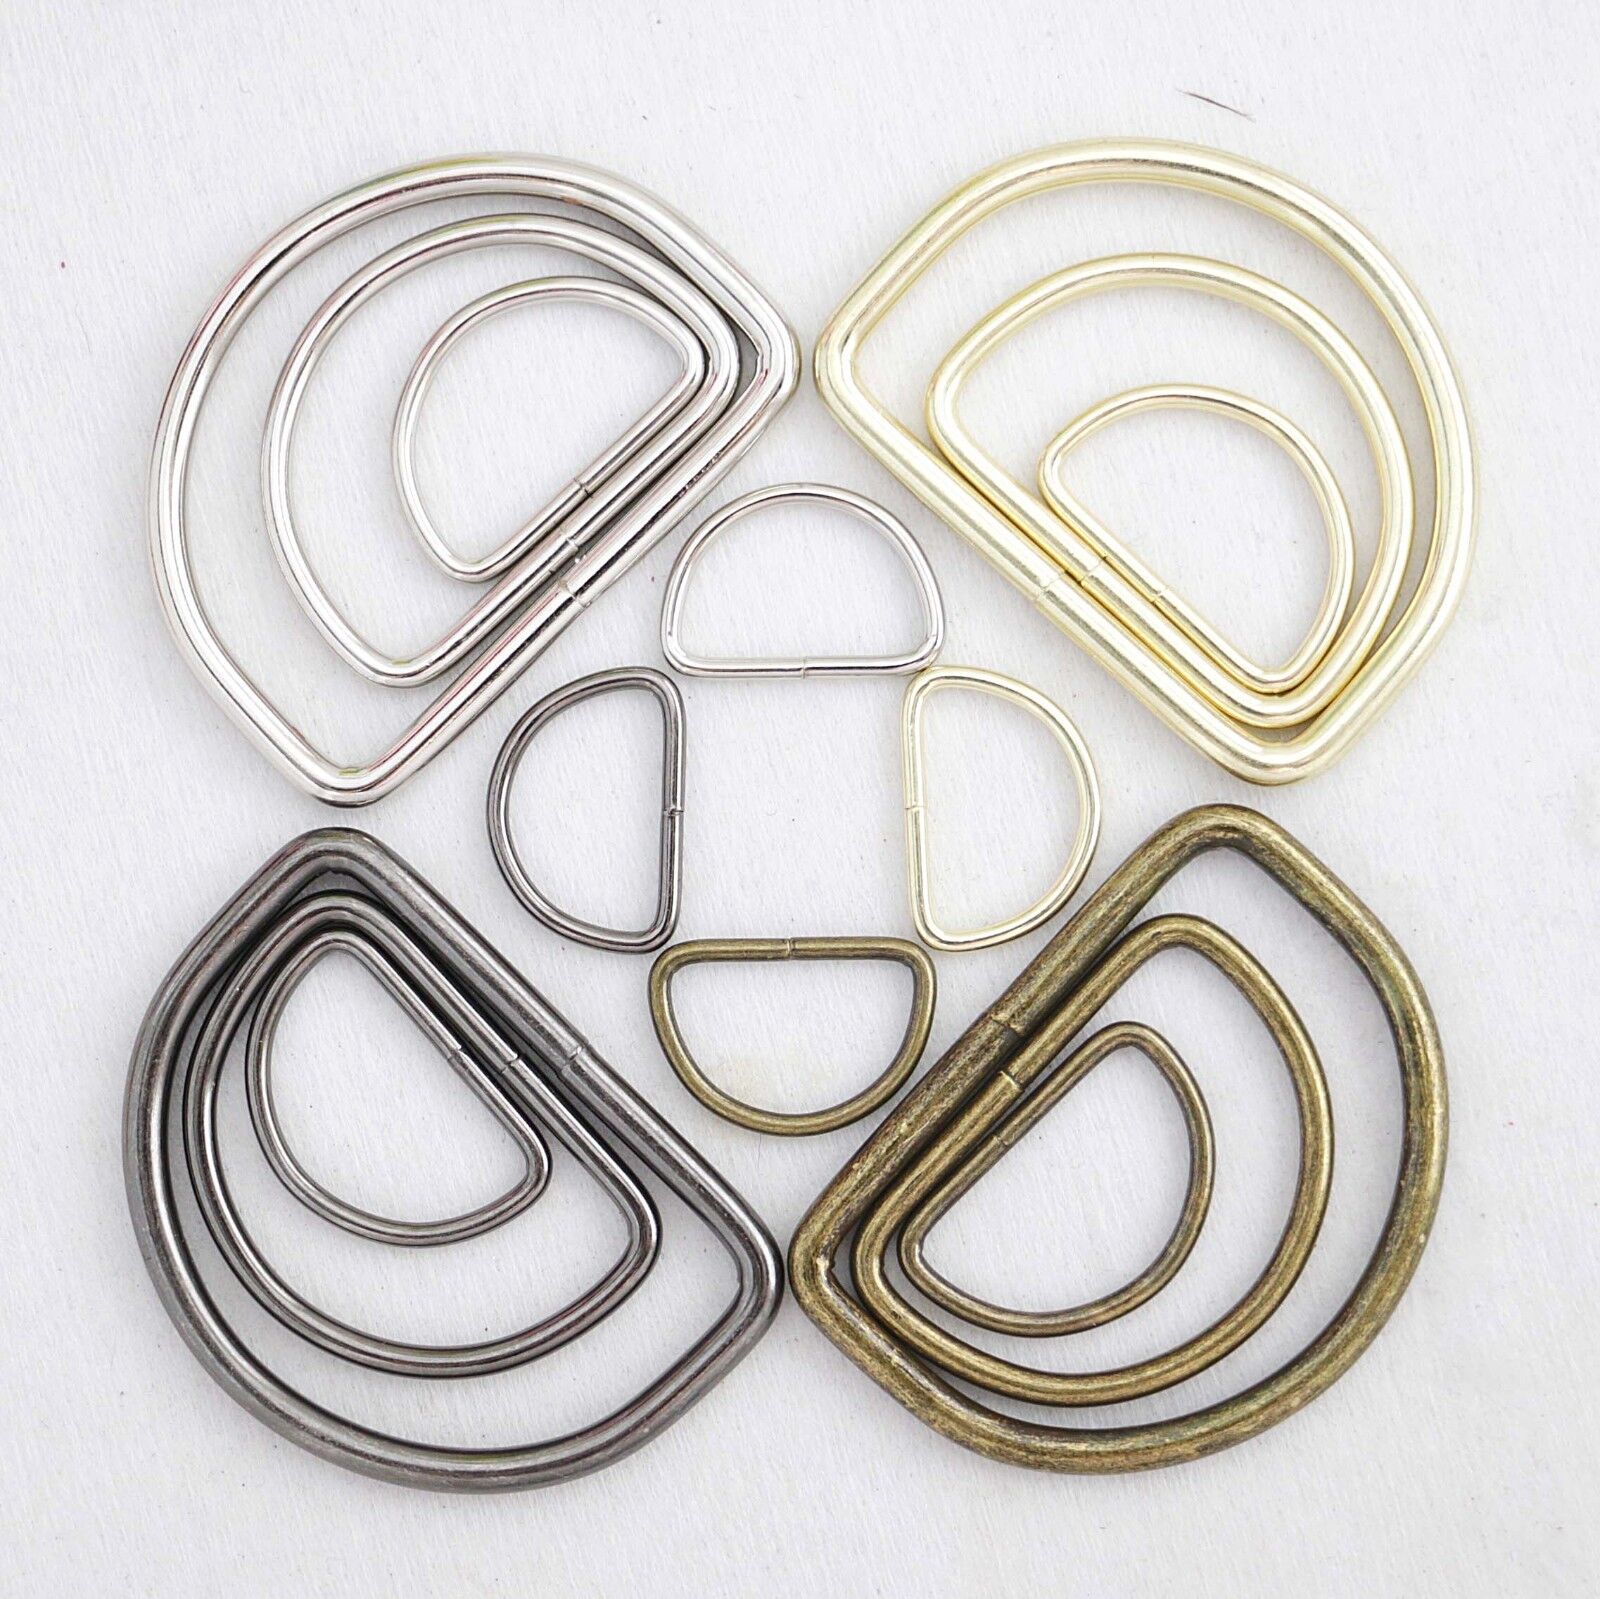 Metal D-Ring Welded ,for straps,purses,bags,Choose quantity Size & color (usa) Fioday Does not apply